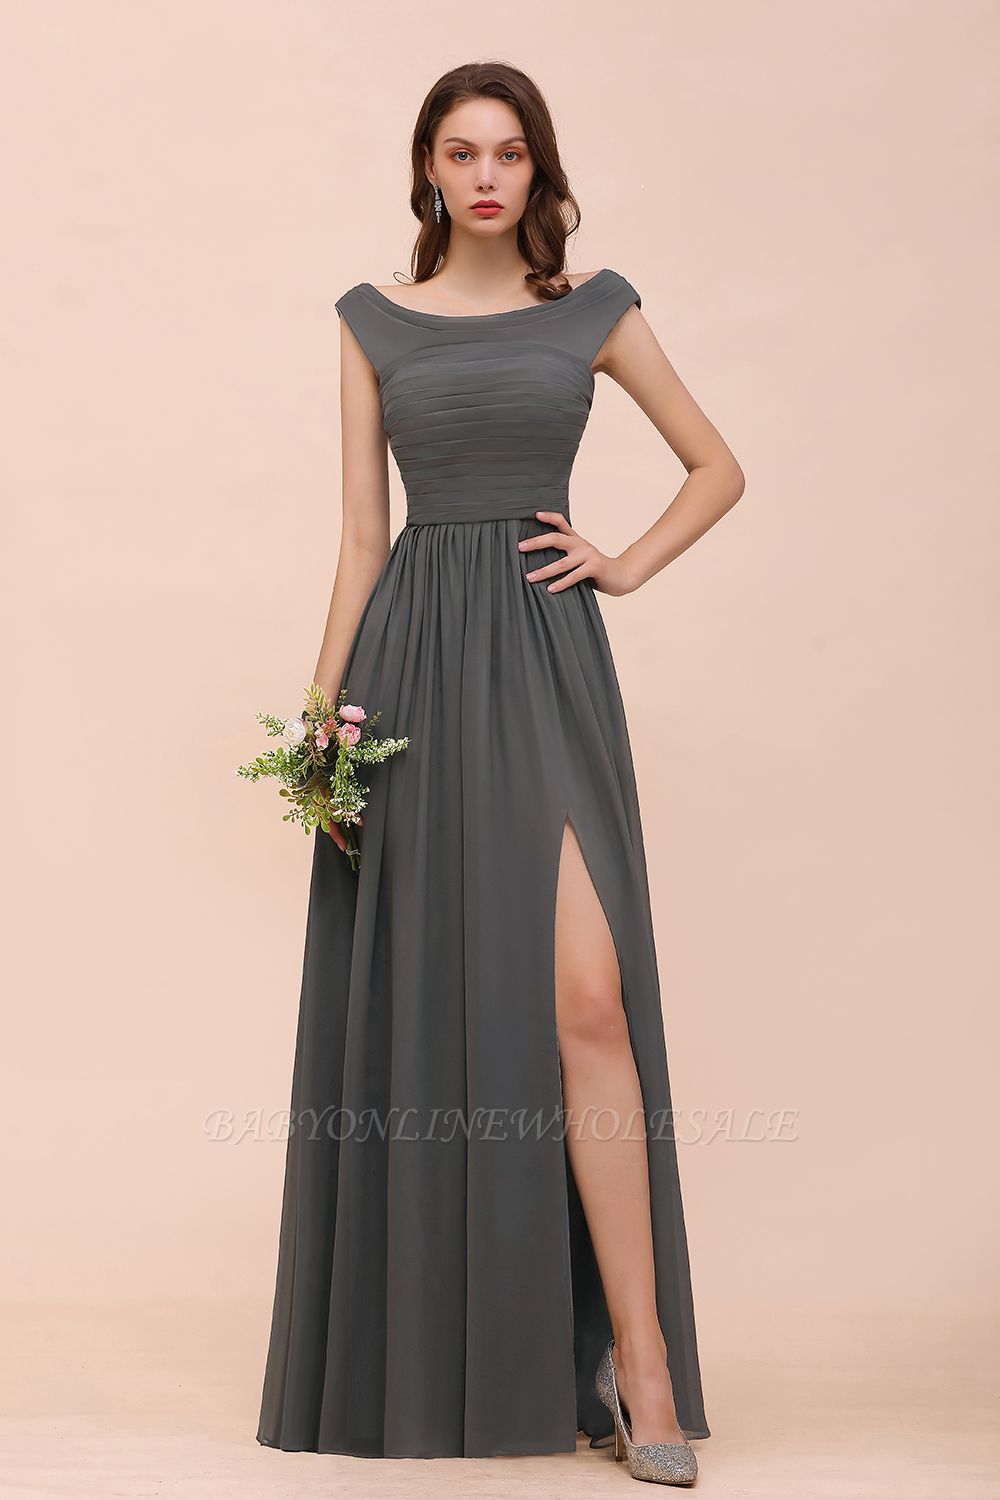 Grey Cap Sleeves 100D Chiffon Long Evening Dress with Side Slit